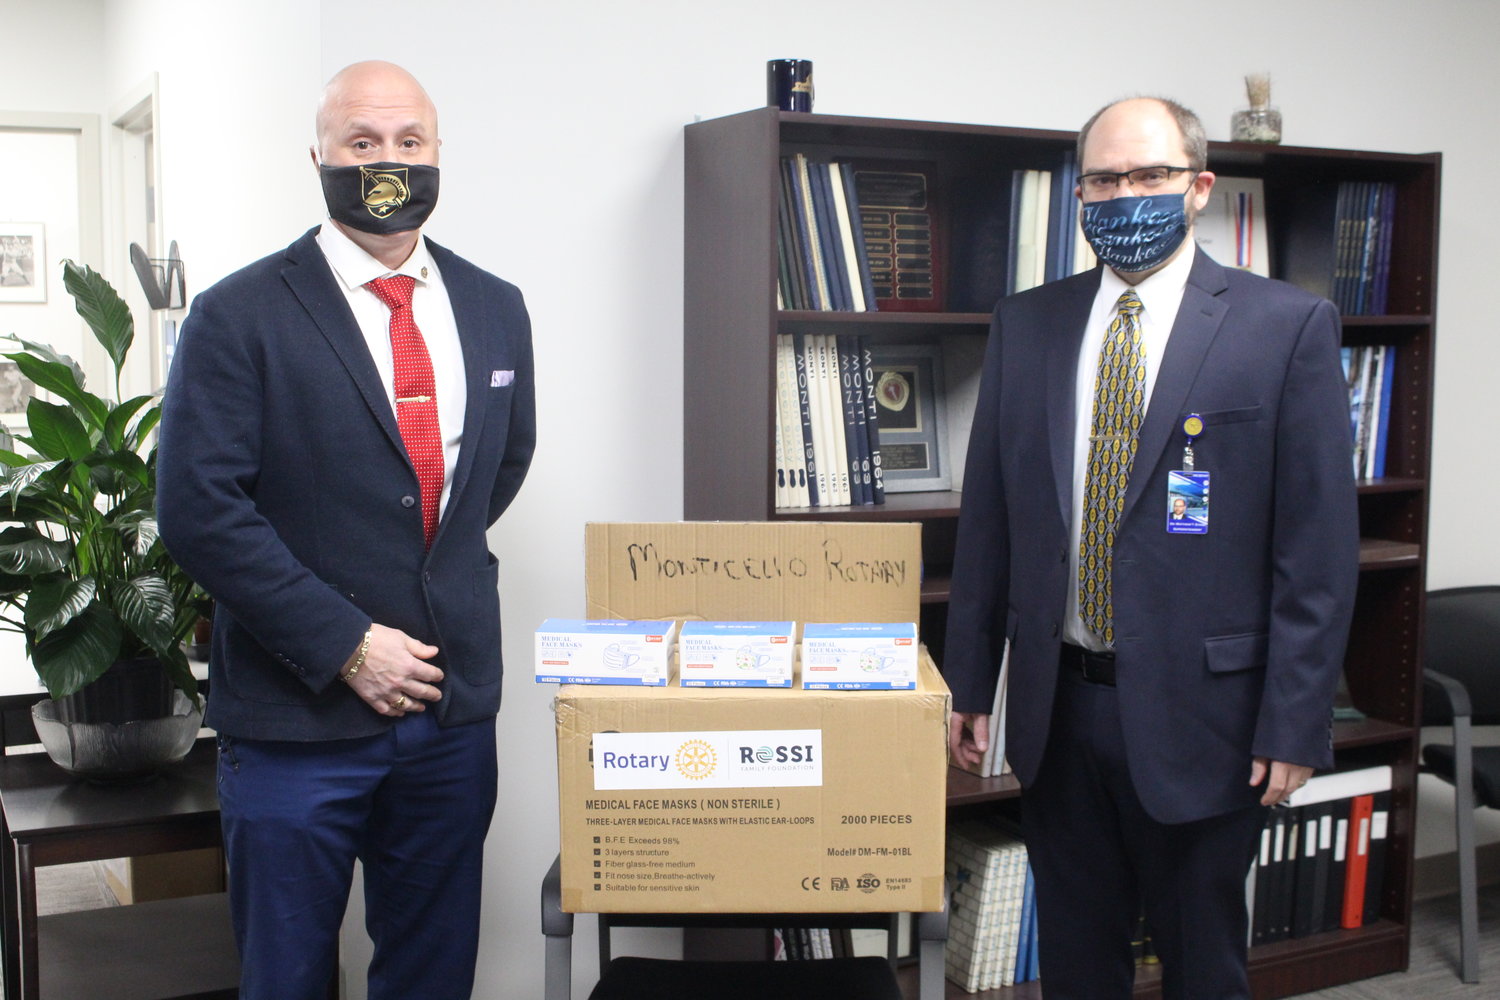 Monticello Board of Education Trustee Todd Grodin, left, delivered nearly 1,000 masks to the Monticello Central School District. Here, Mr. Grodin poses with Superintendent of Schools Dr. Matthew Evans.